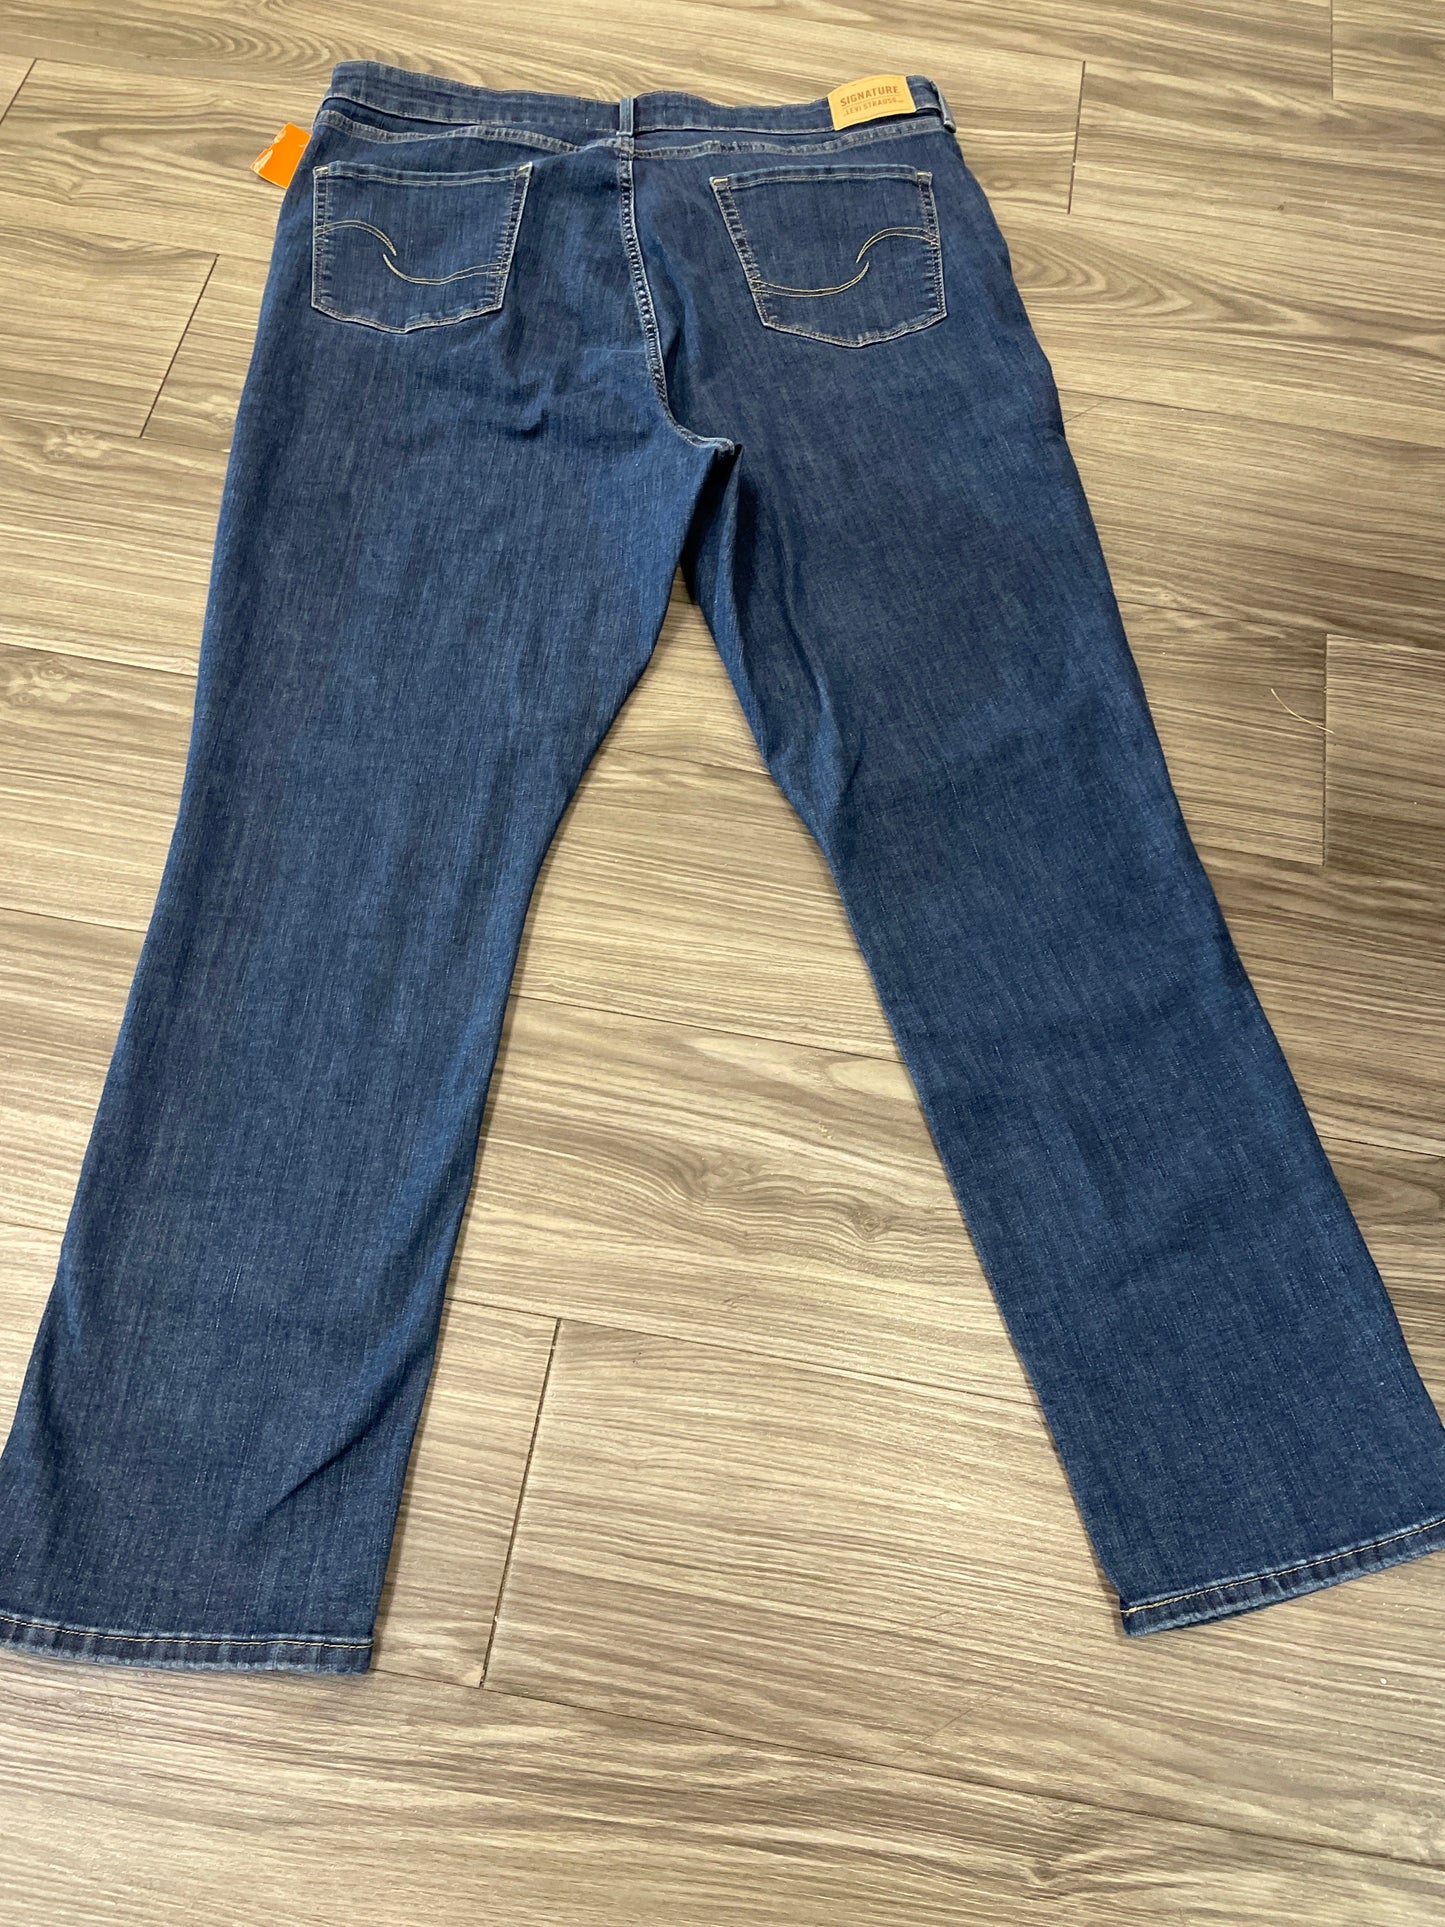 Jeans Straight By Levis  Size: 20